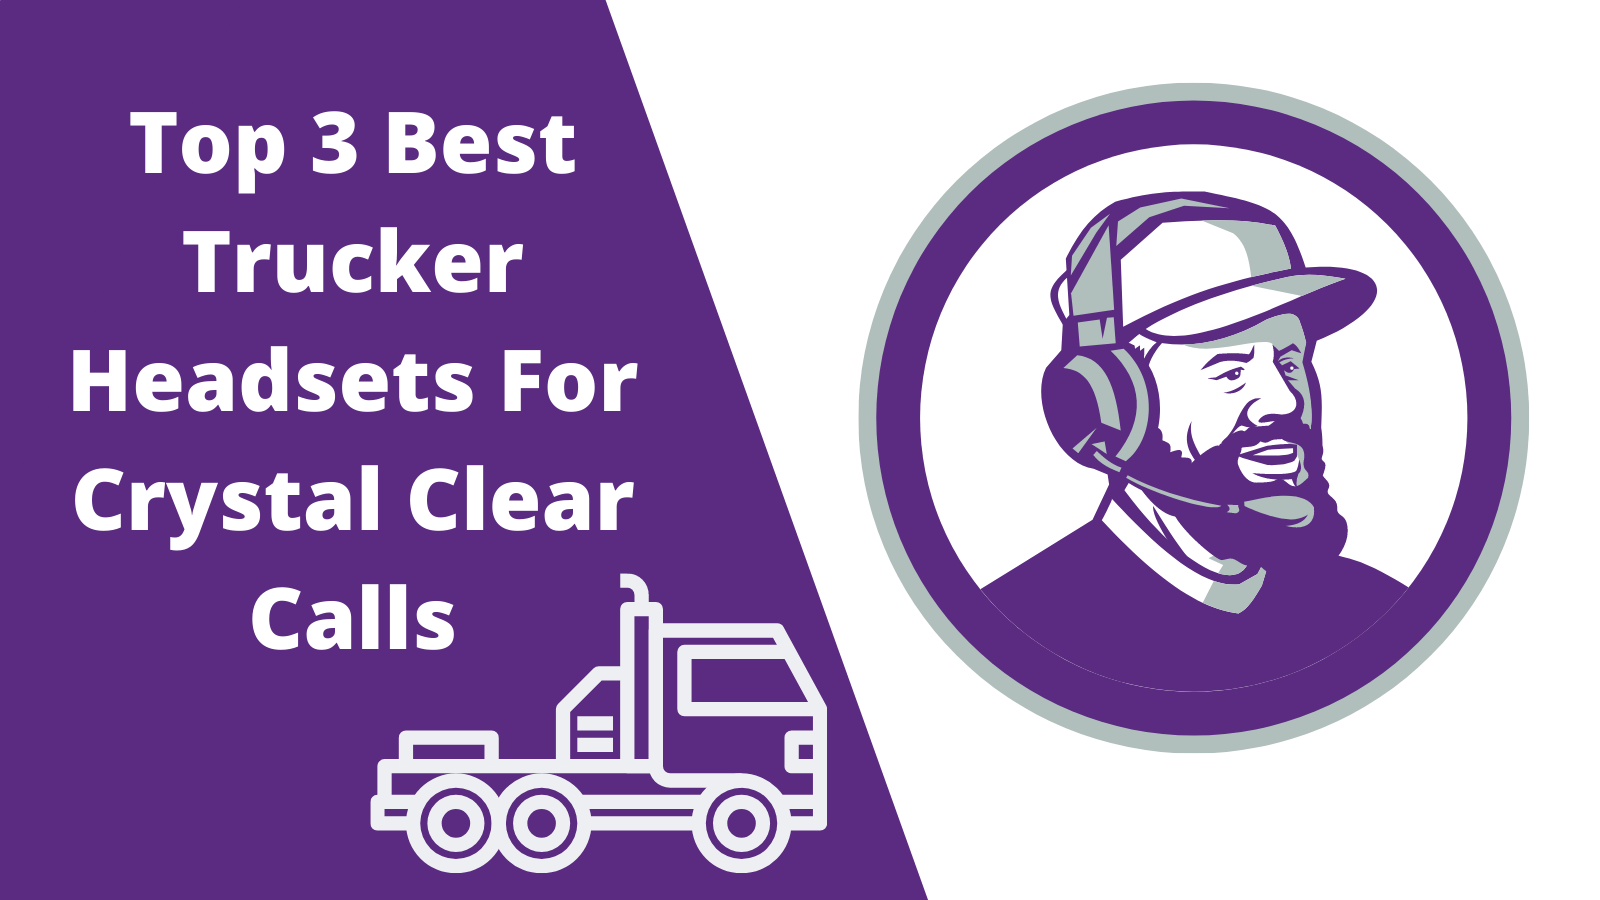 Top 3 Best Trucker Headsets For Crystal Clear Calls - Headset Advisor